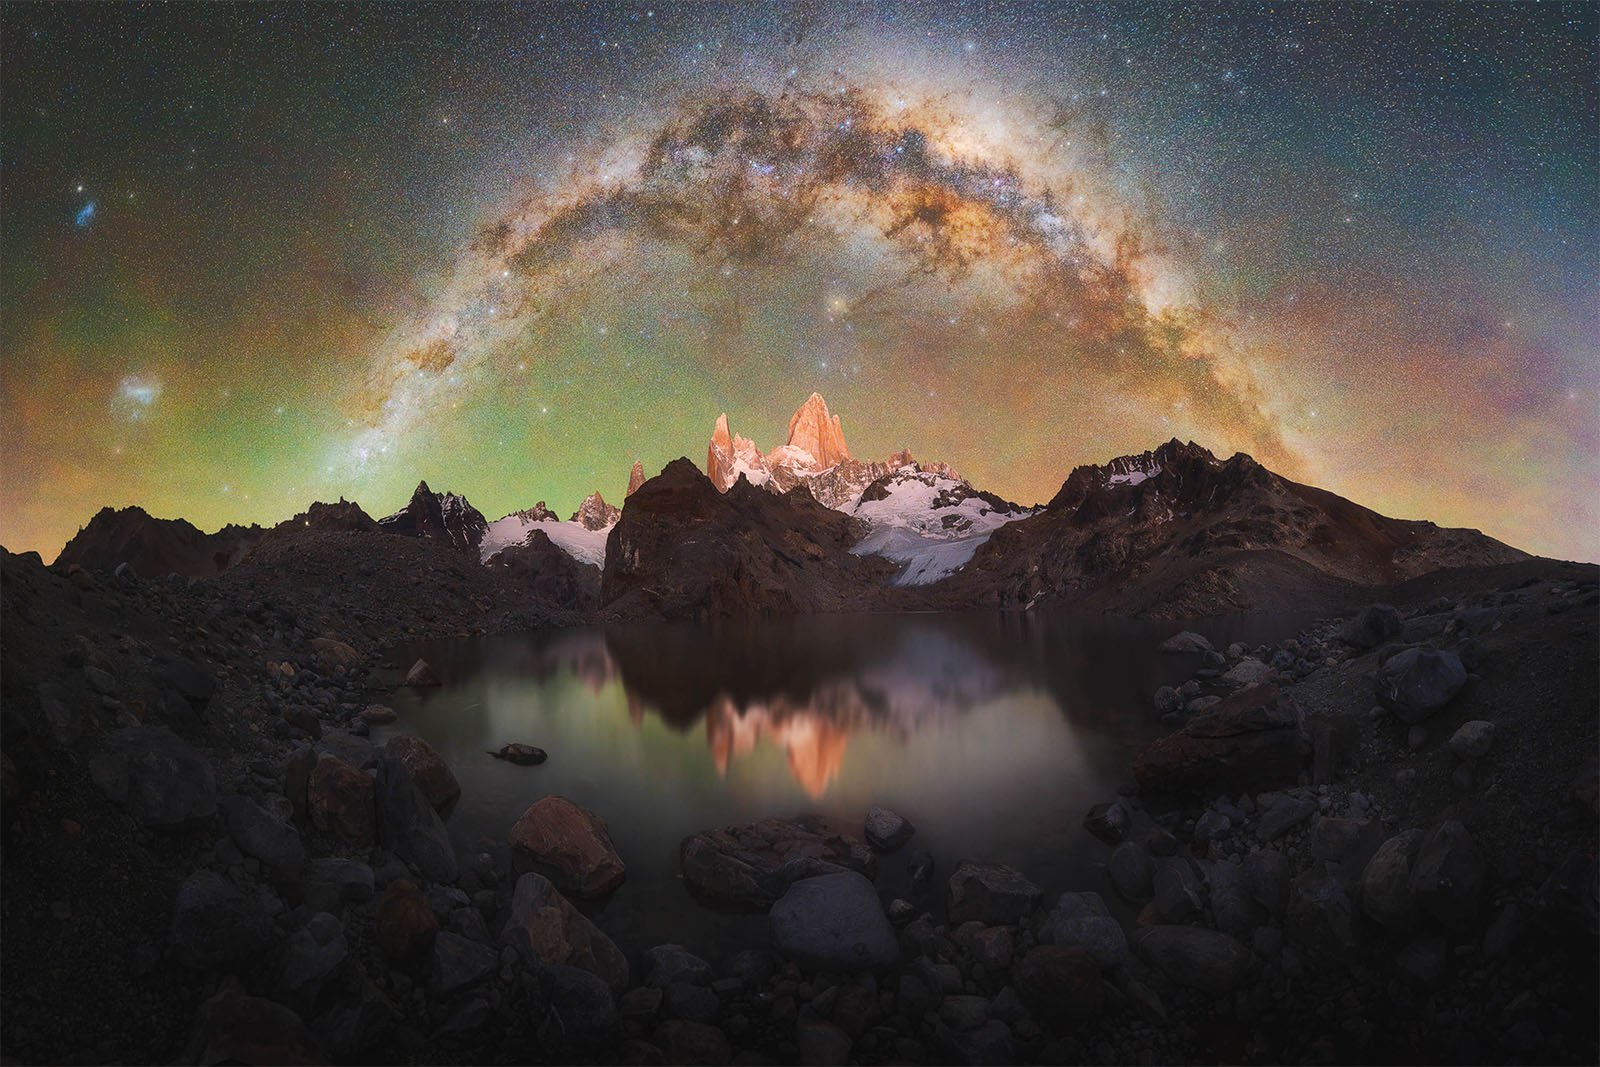 A breathtaking night sky over a mountainous landscape with a vibrant Milky Way arc stretching across the sky. Snow-capped peaks are reflected in a calm lake in the foreground, enhancing the serene and majestic atmosphere.